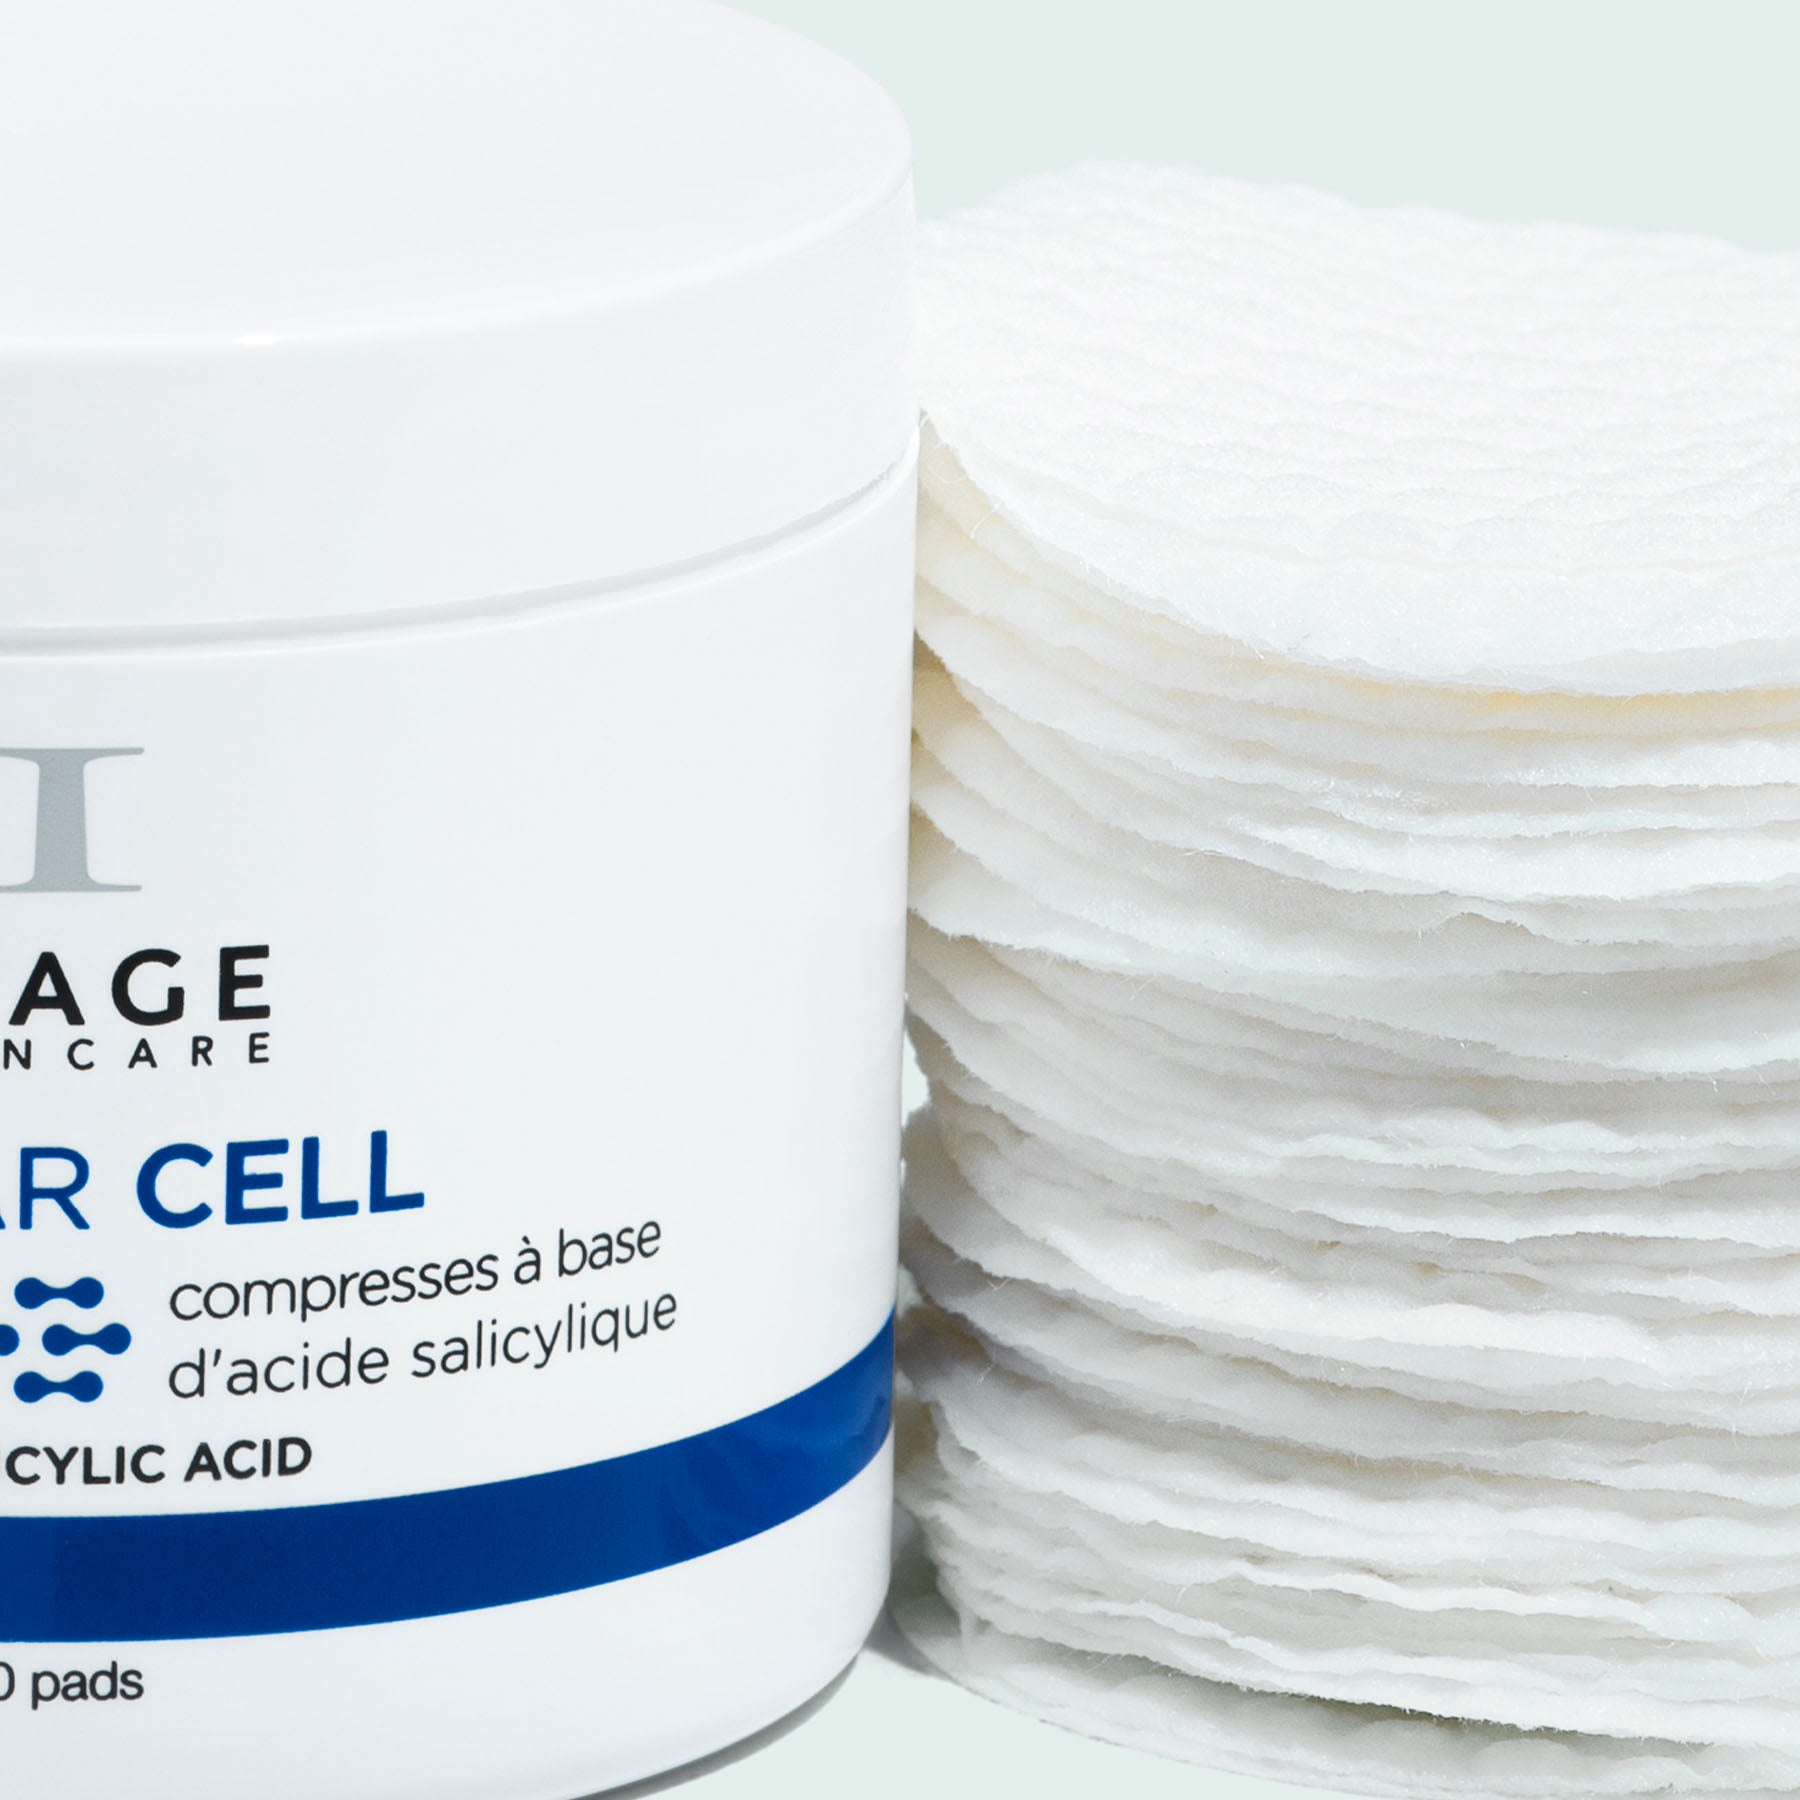 Image Clear Cell pads